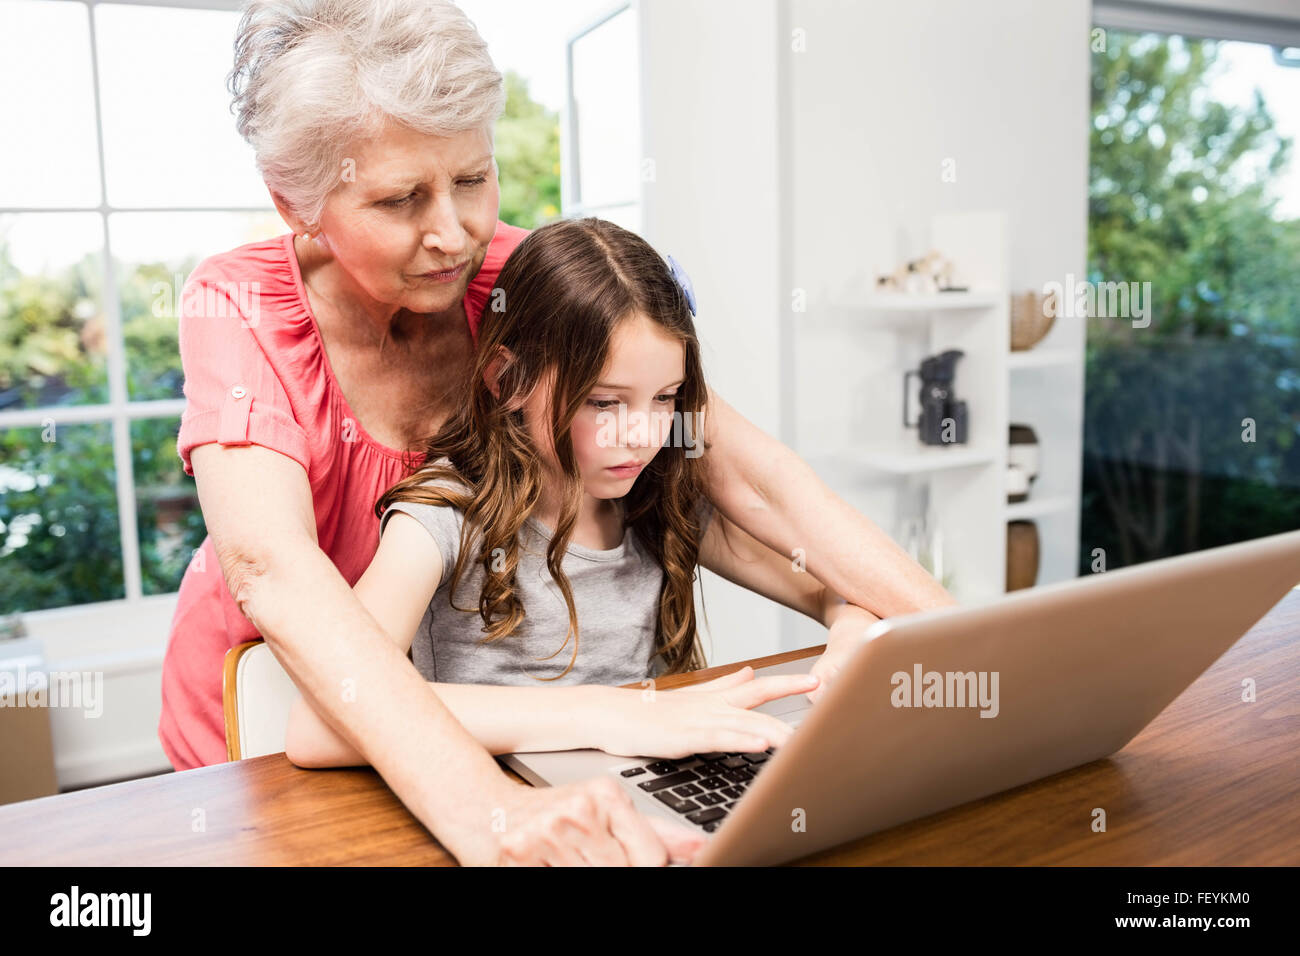 Portrait of smiling grandmother and granddaughter using laptop Stock Photo